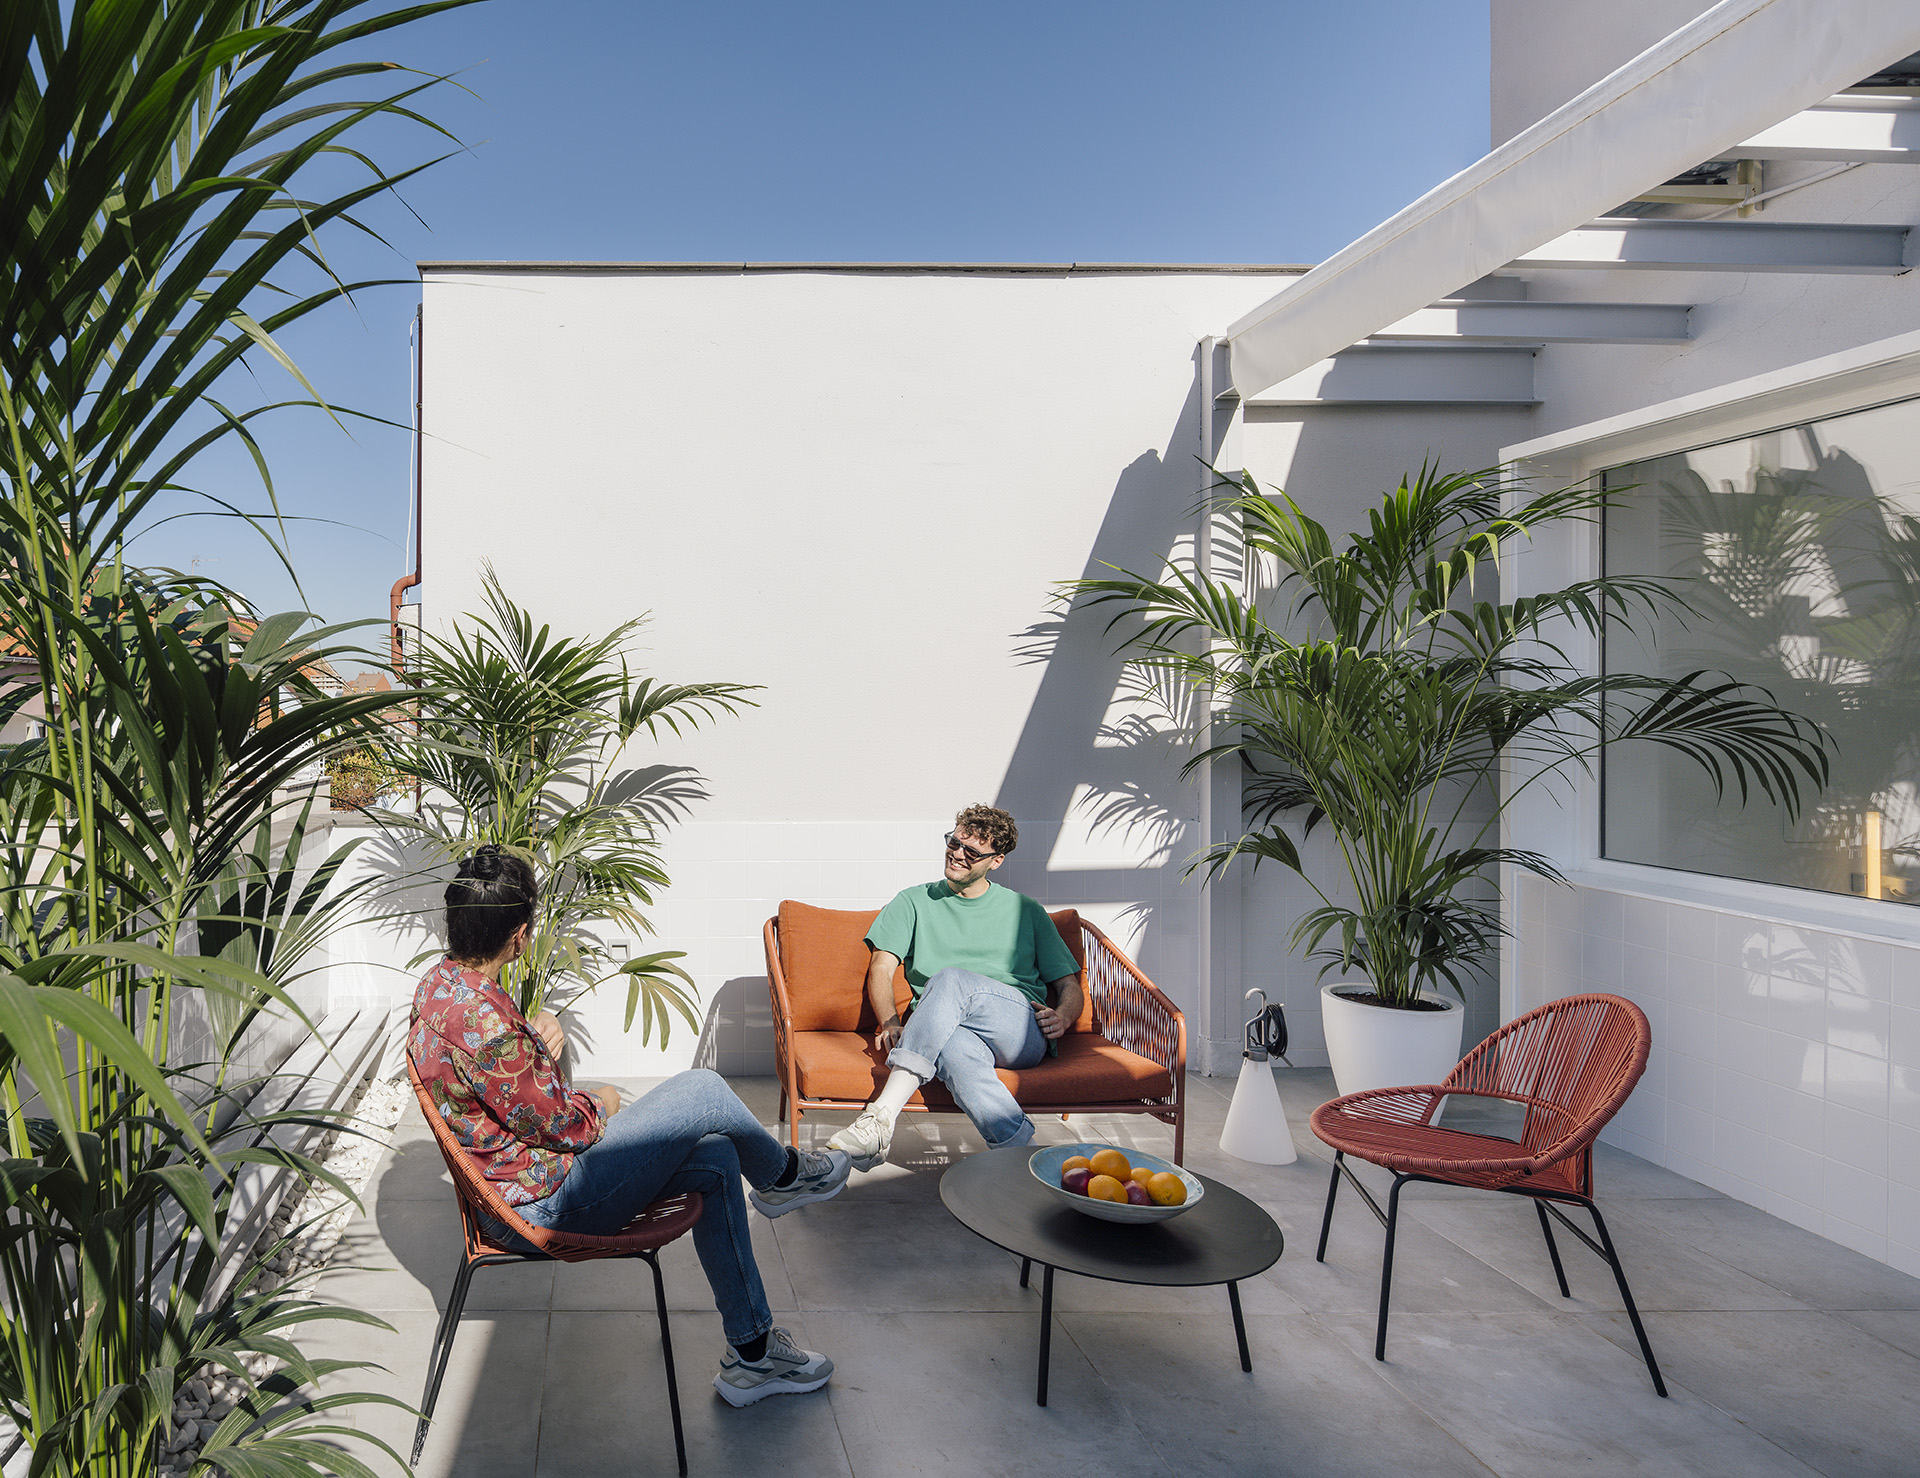 Individual and social dimensions: Dozendoors a co-living in Madrid's multi-ethnic neighborhood